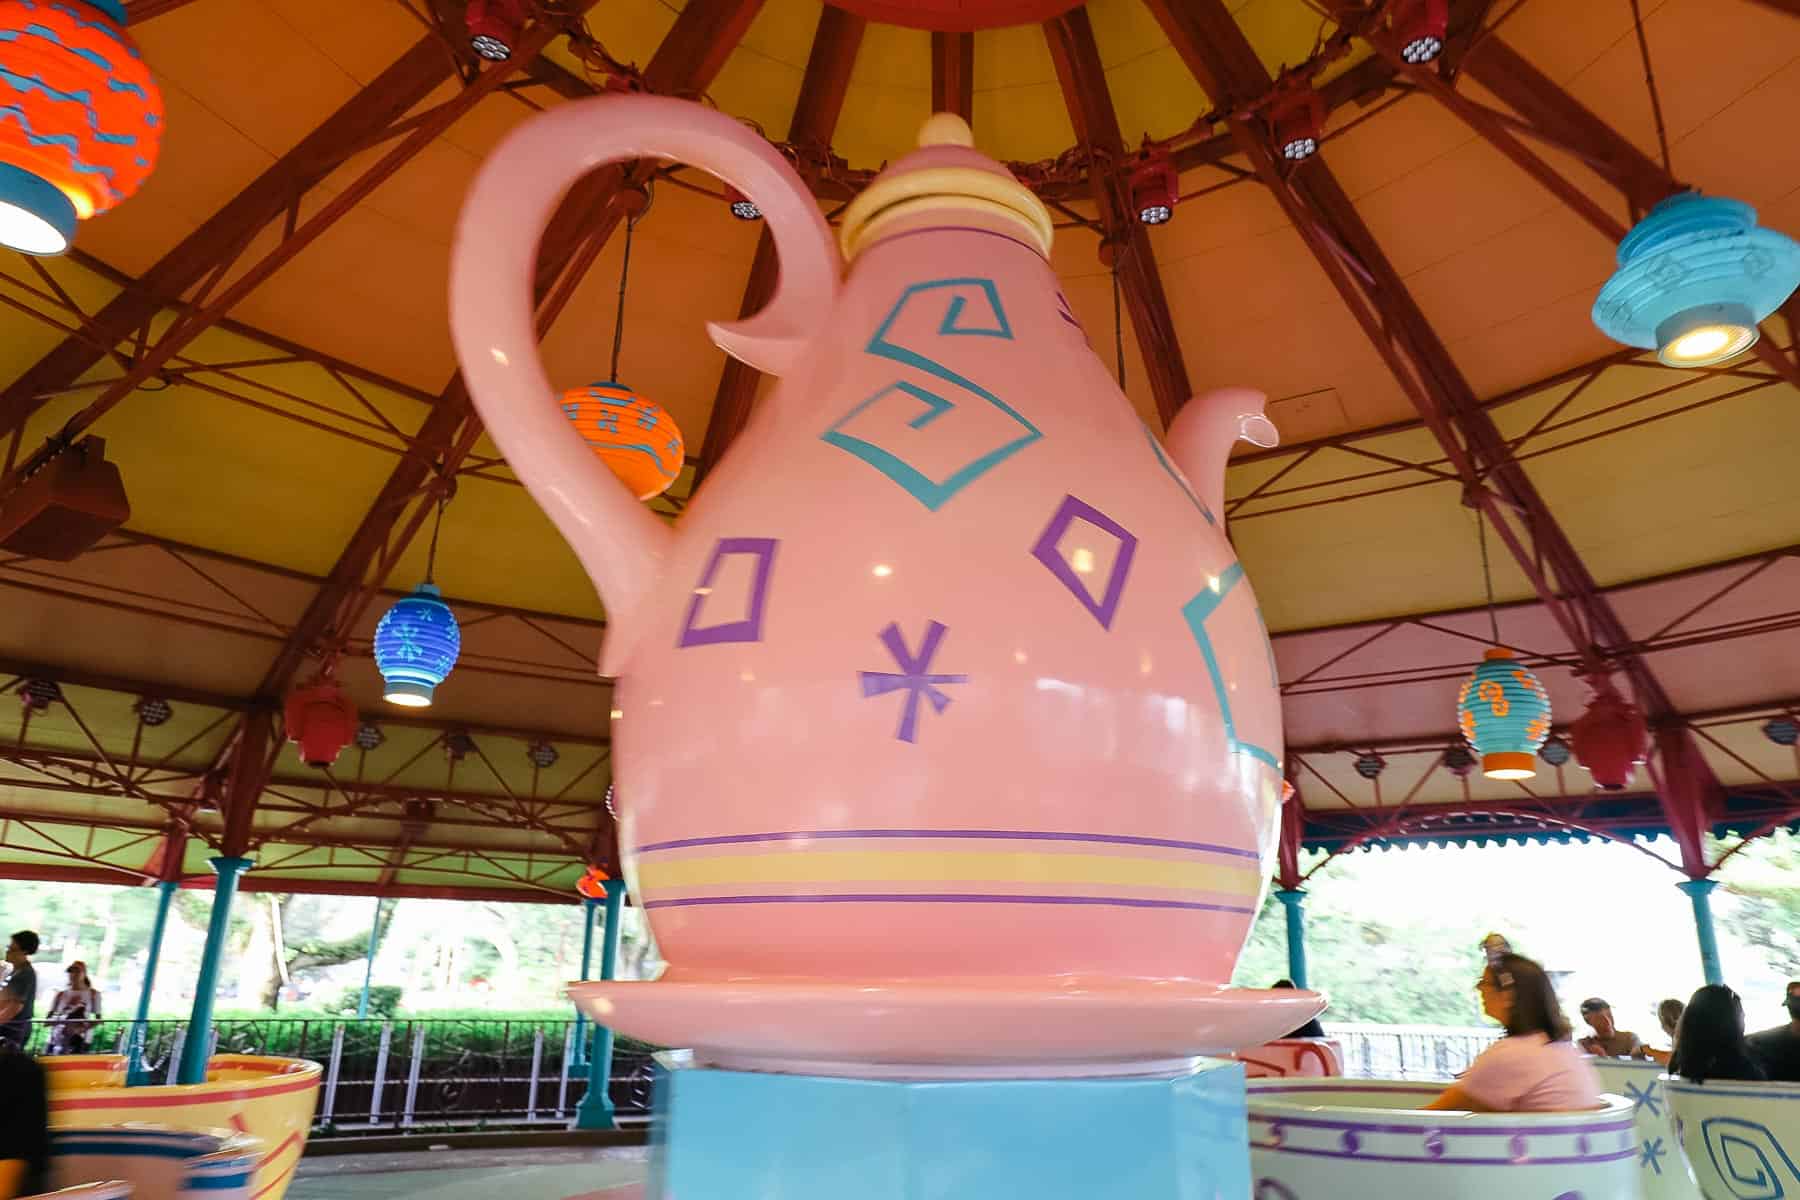 A giant teapot sits in the center of the ride. All the teacups spin around it. 